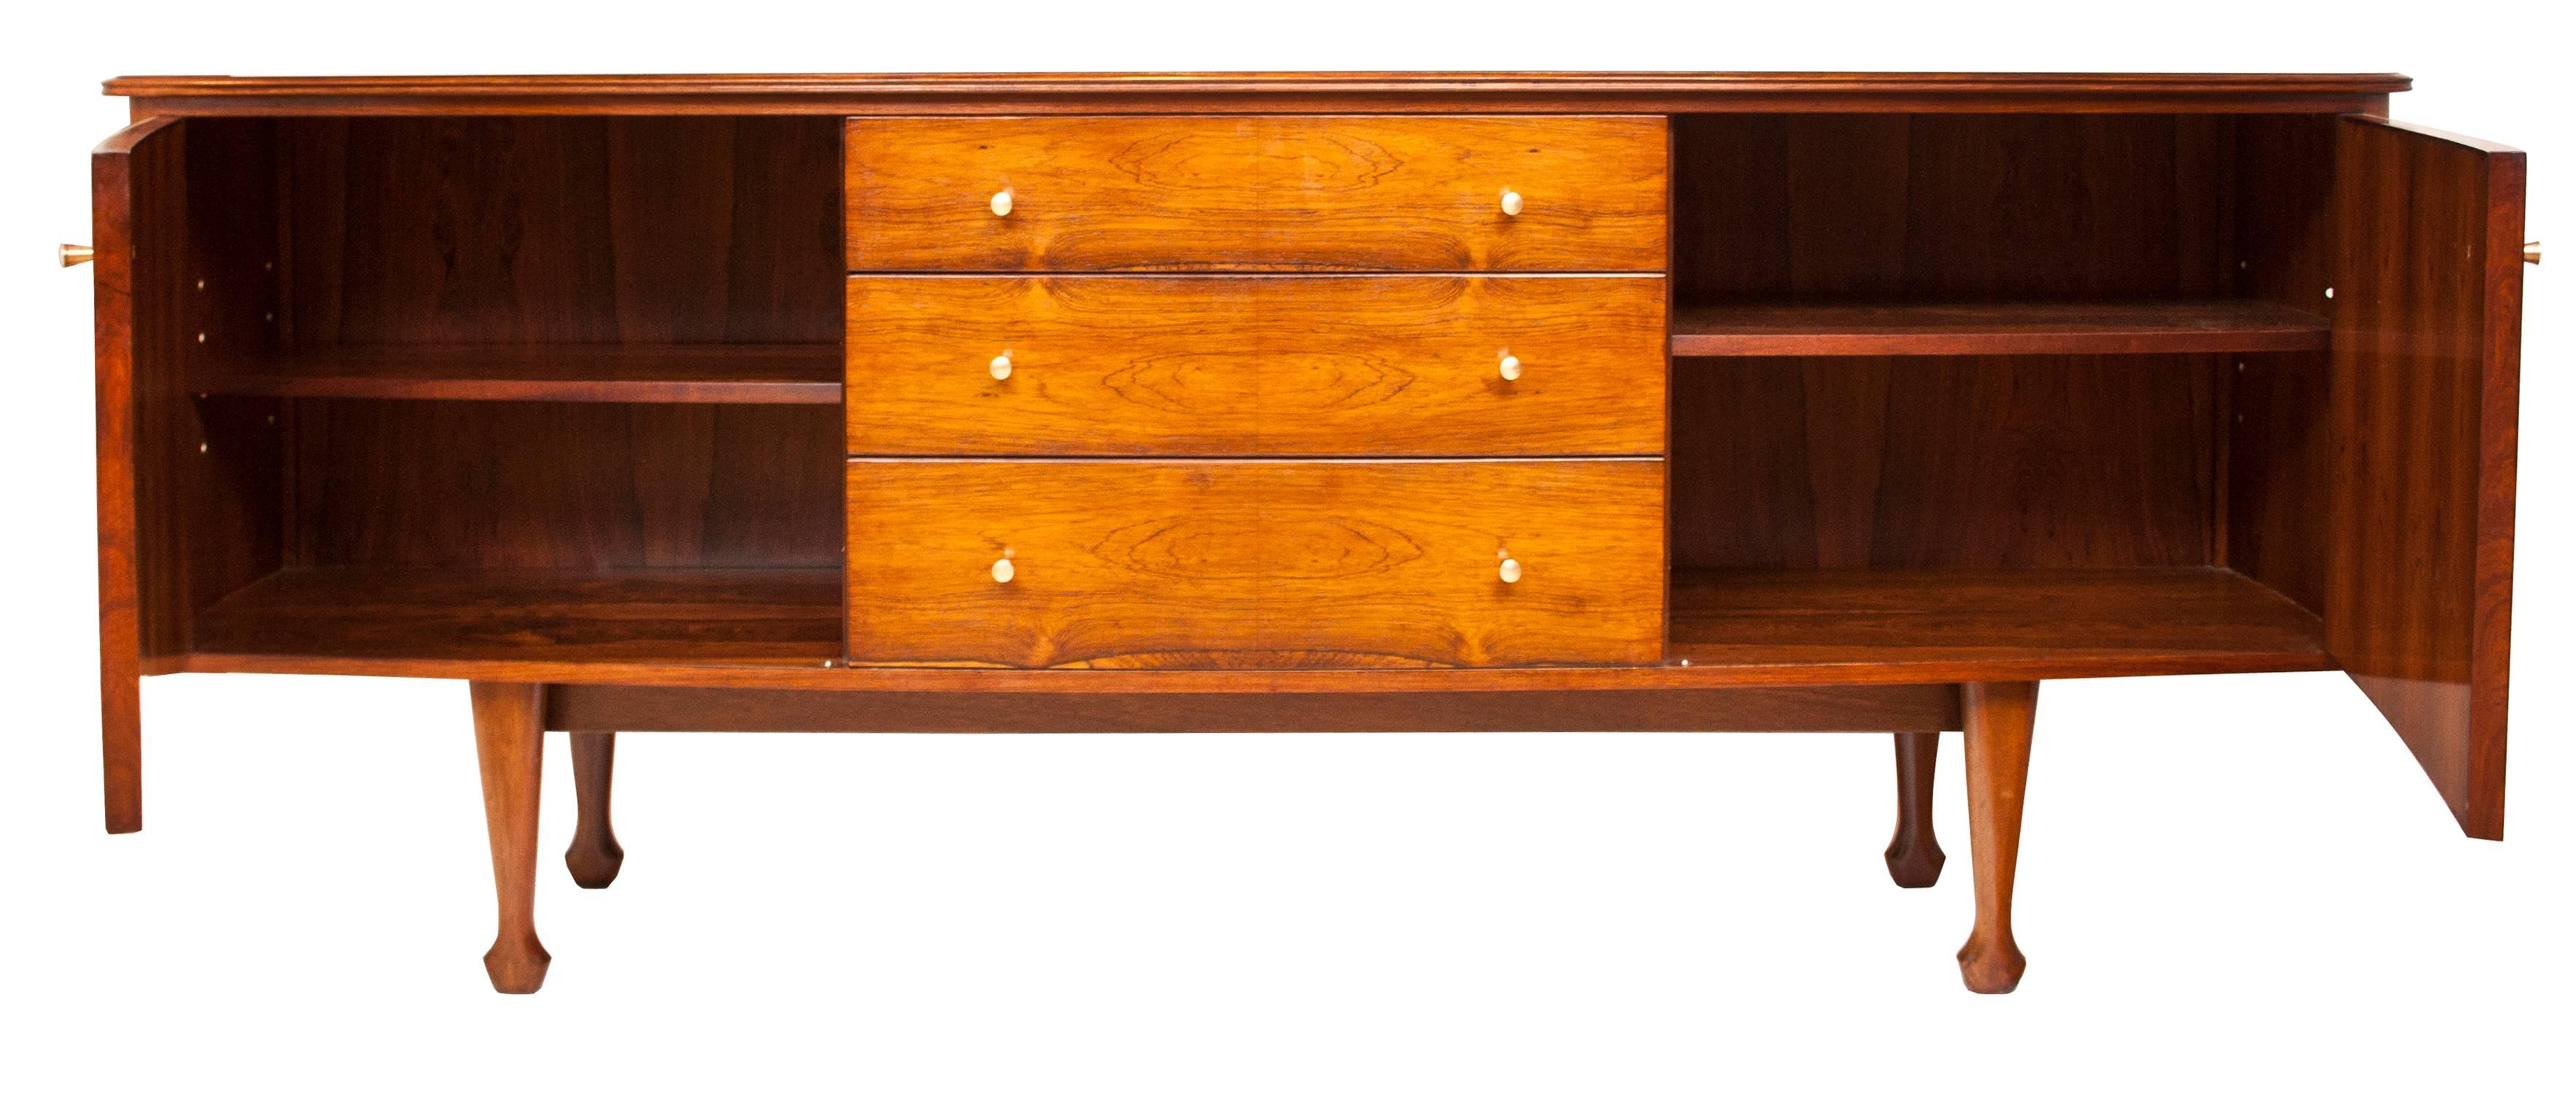 Indian rosewood sideboard designed by Andrew J Milne and retailed by Heals.
English 1960s of curved form with high quality veneers and brass handles.